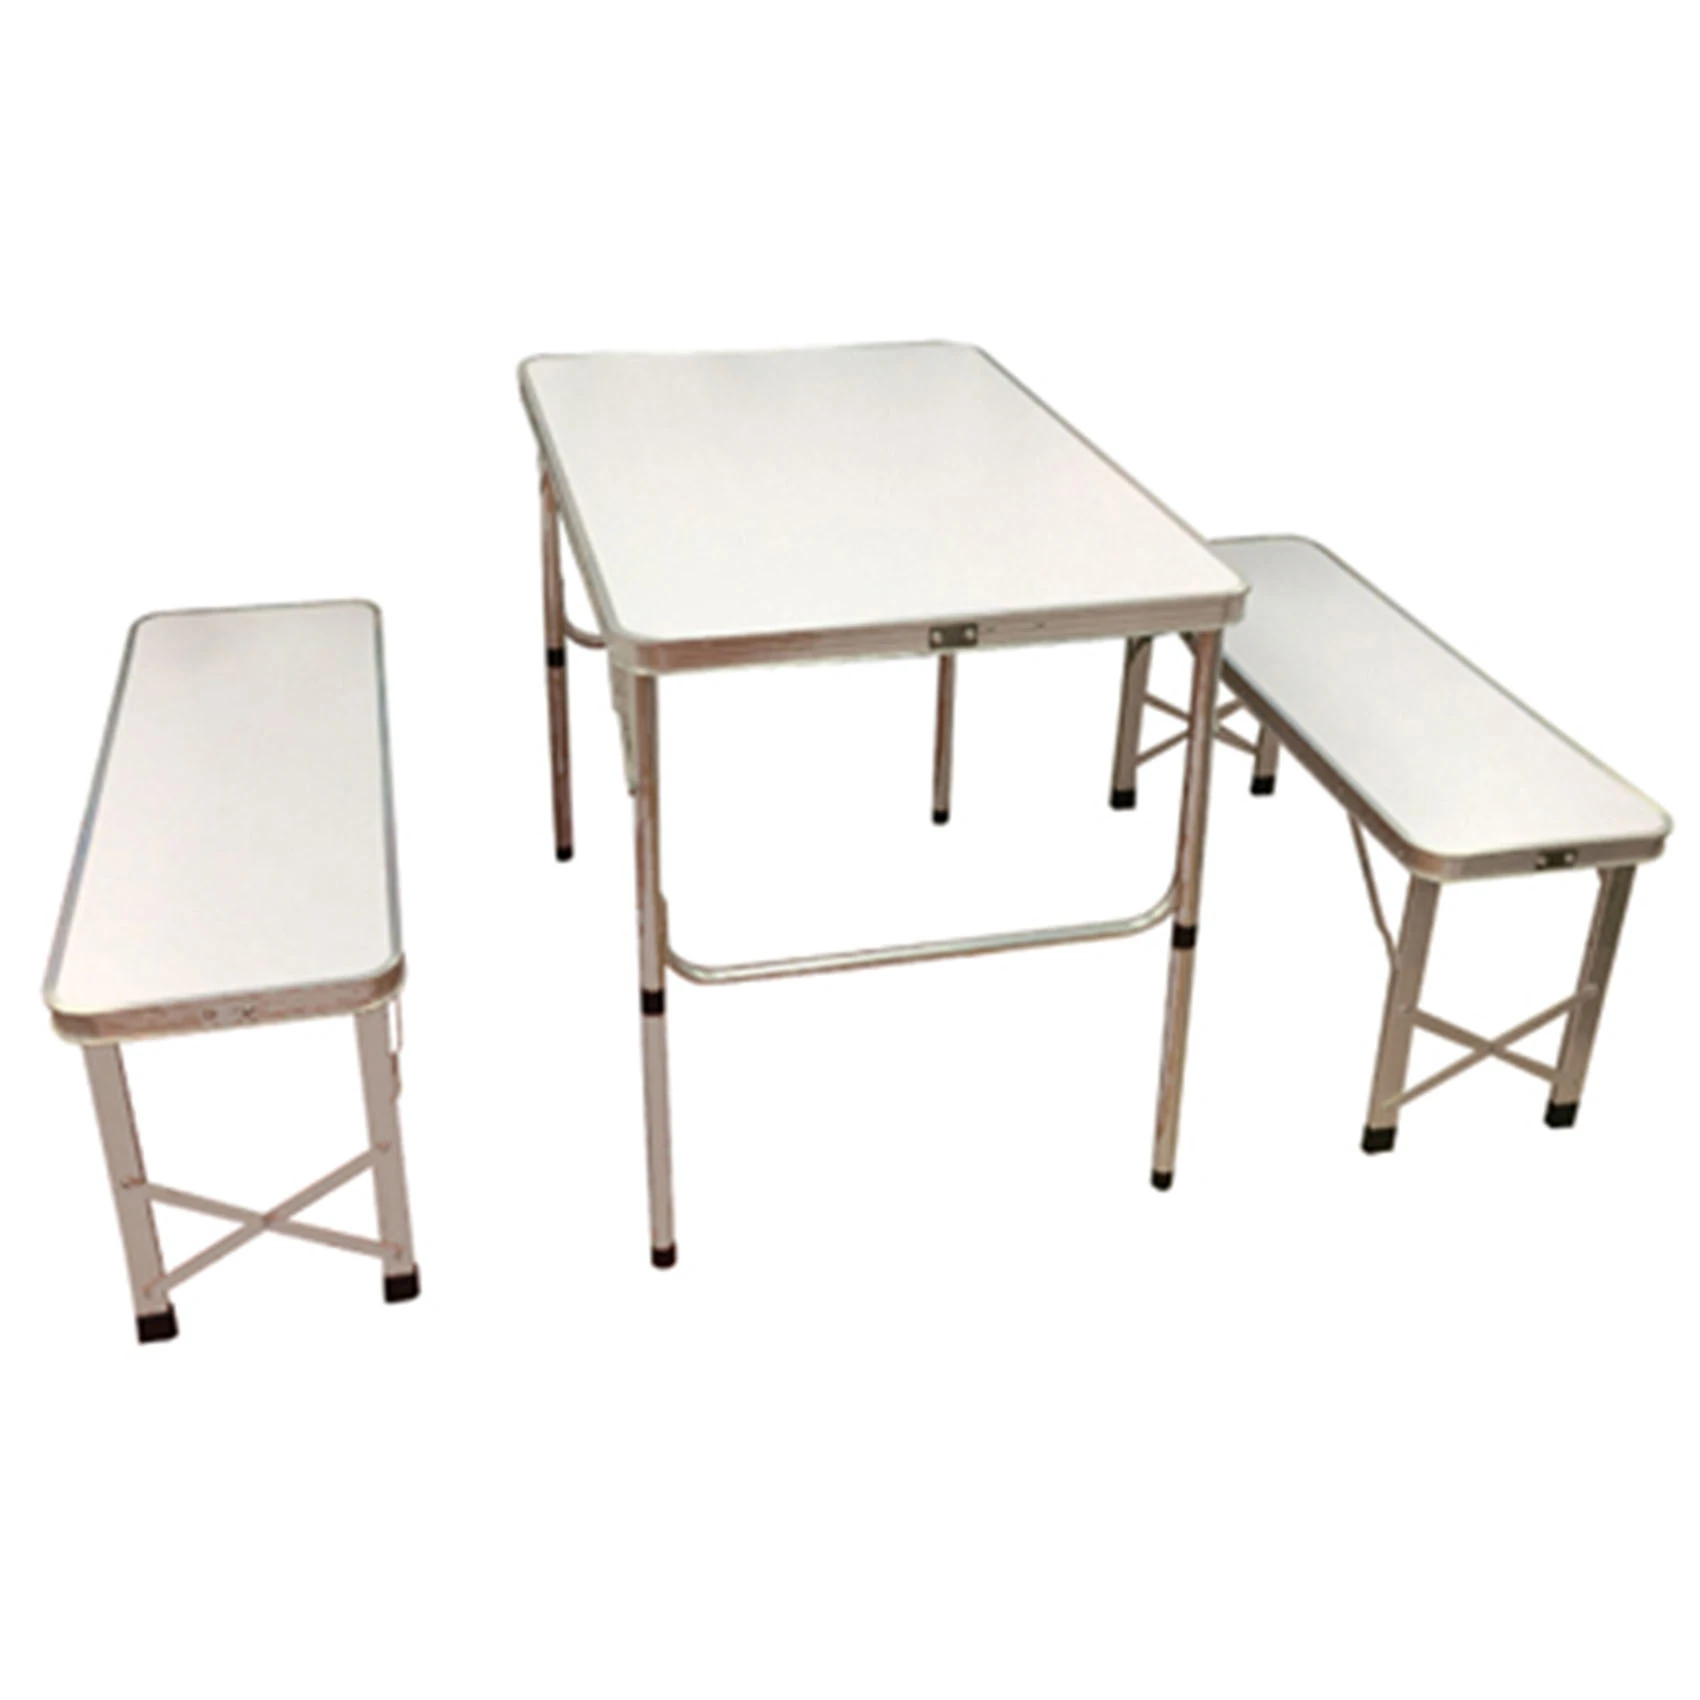 CAMPMATE ALUMINIUM PORTABLE TABLE WITH 2PC BENCH 90X29X40-2PCS TABLE- 90X59X70CM |CAMPING FURNITURE| CAMPING TABLE AND CHAIR | OUTDOOR AFTS-9060